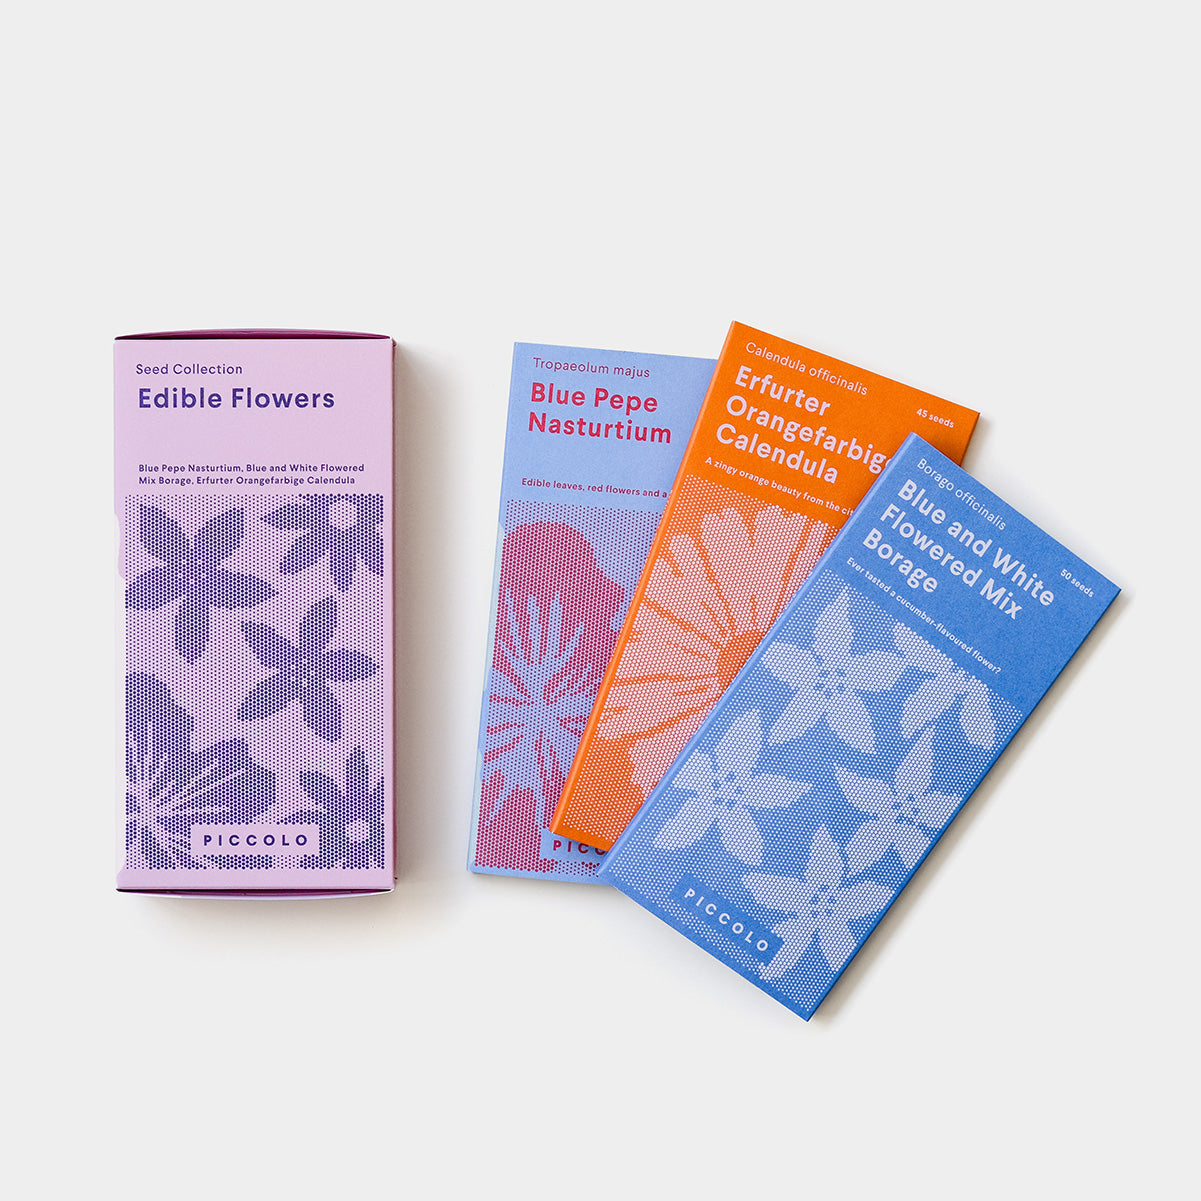 Piccolo Edible Flowers Seeds Collection